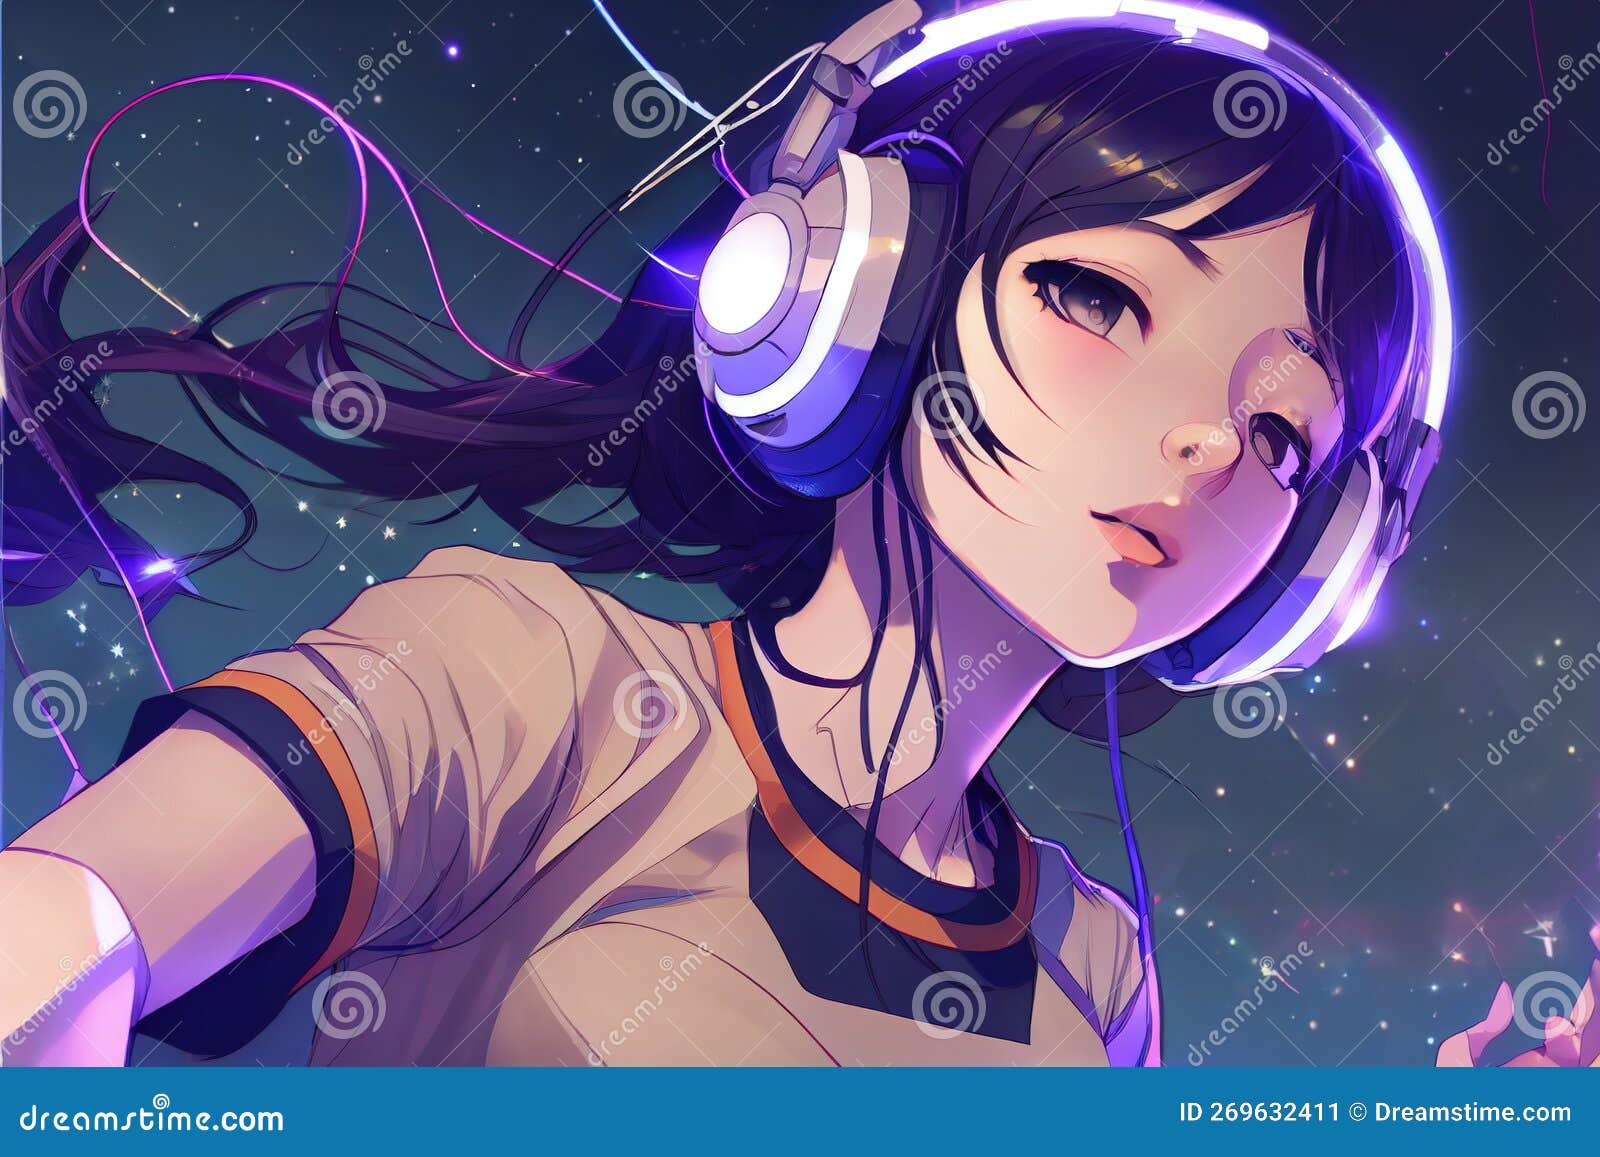 chitra rajeev recommends chibi girl with headphones pic